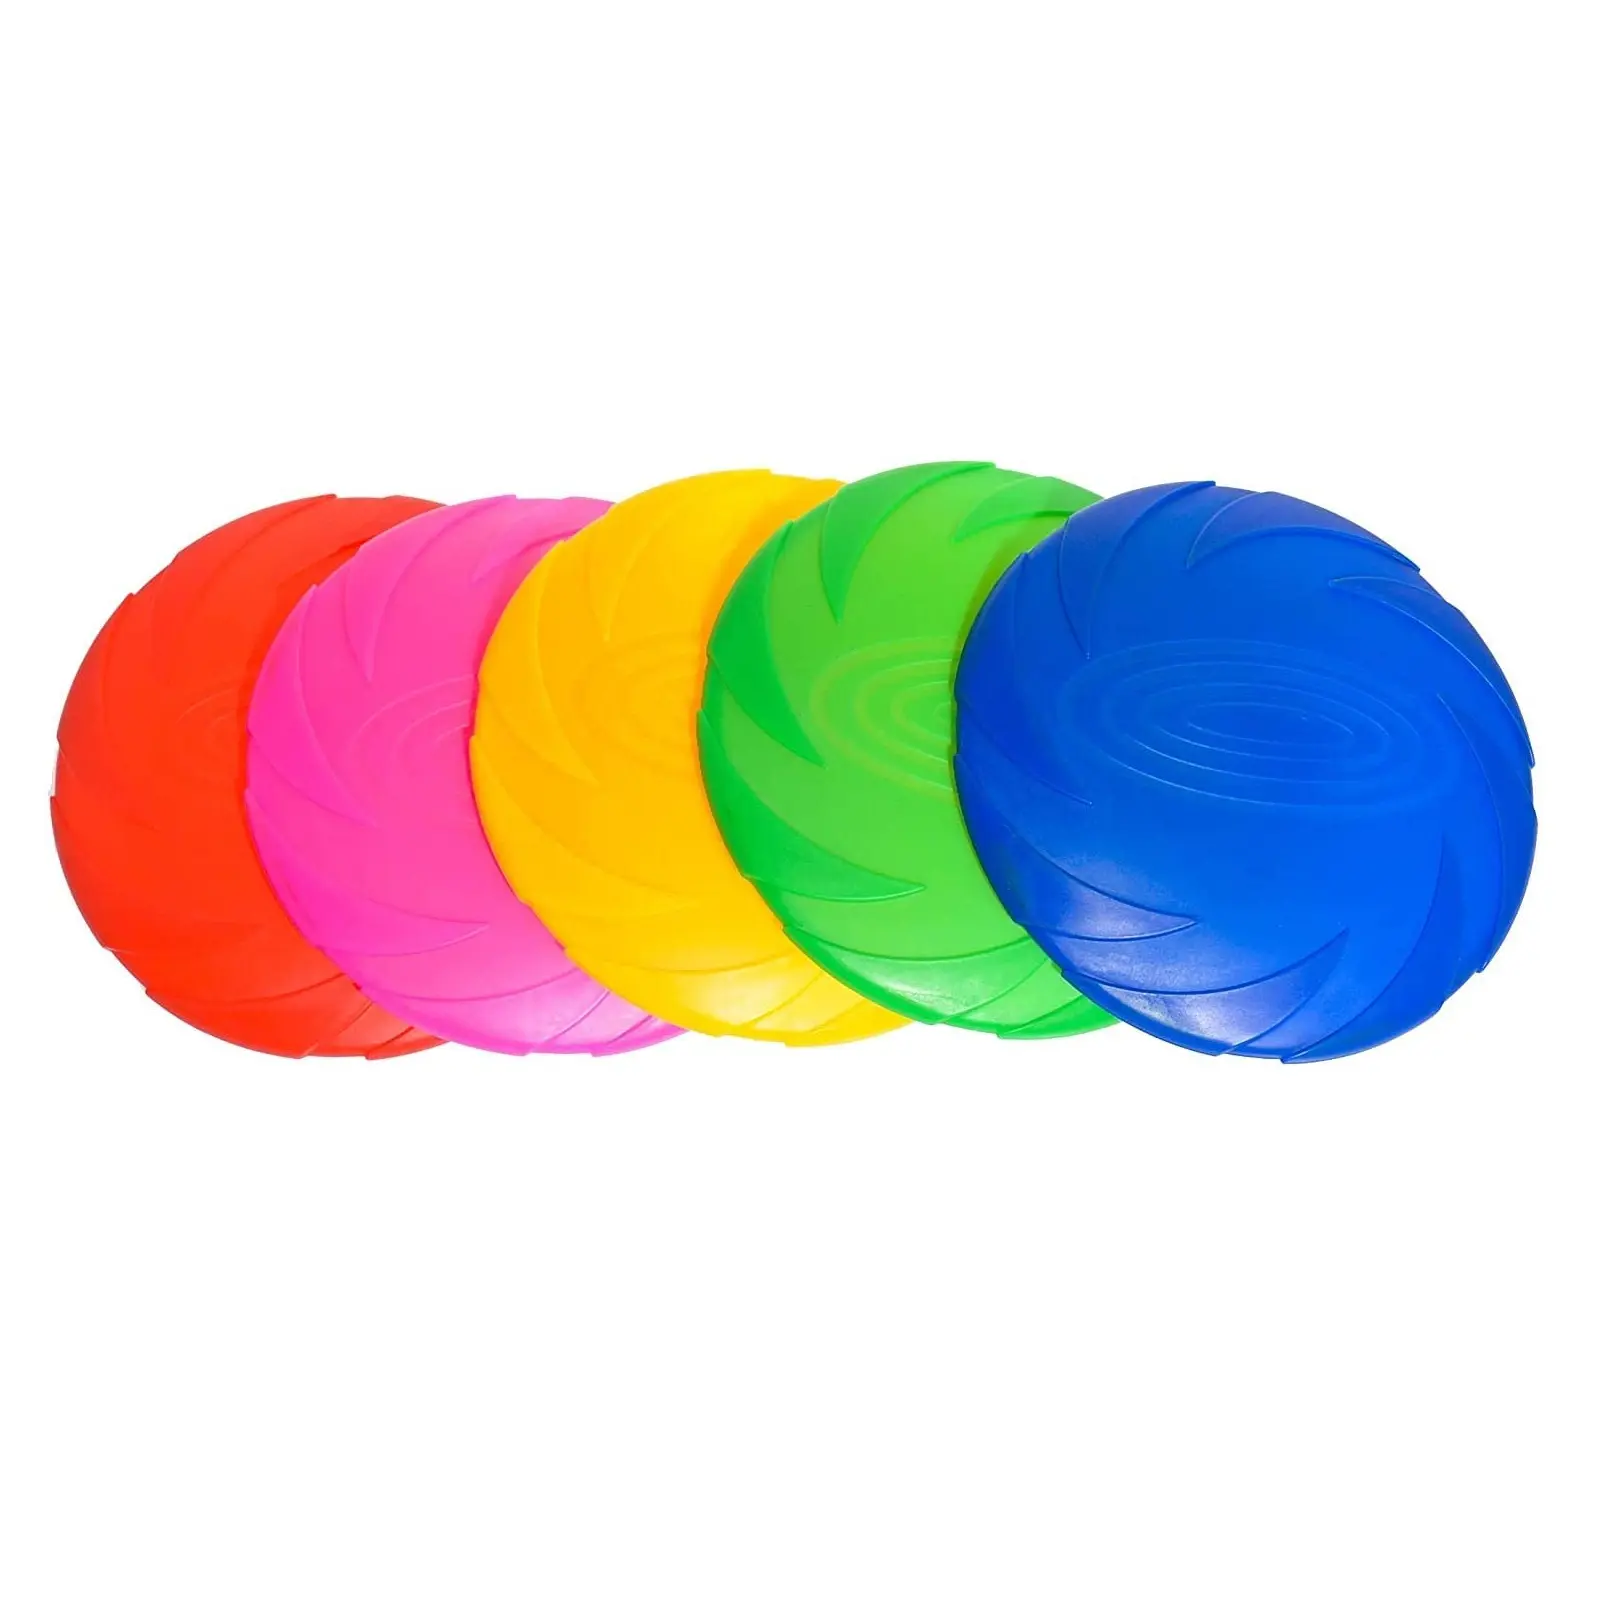 Kids Outdoor Flying Saucer Game Hot Sale Plastic Flying Disc at Wholesale Price From India